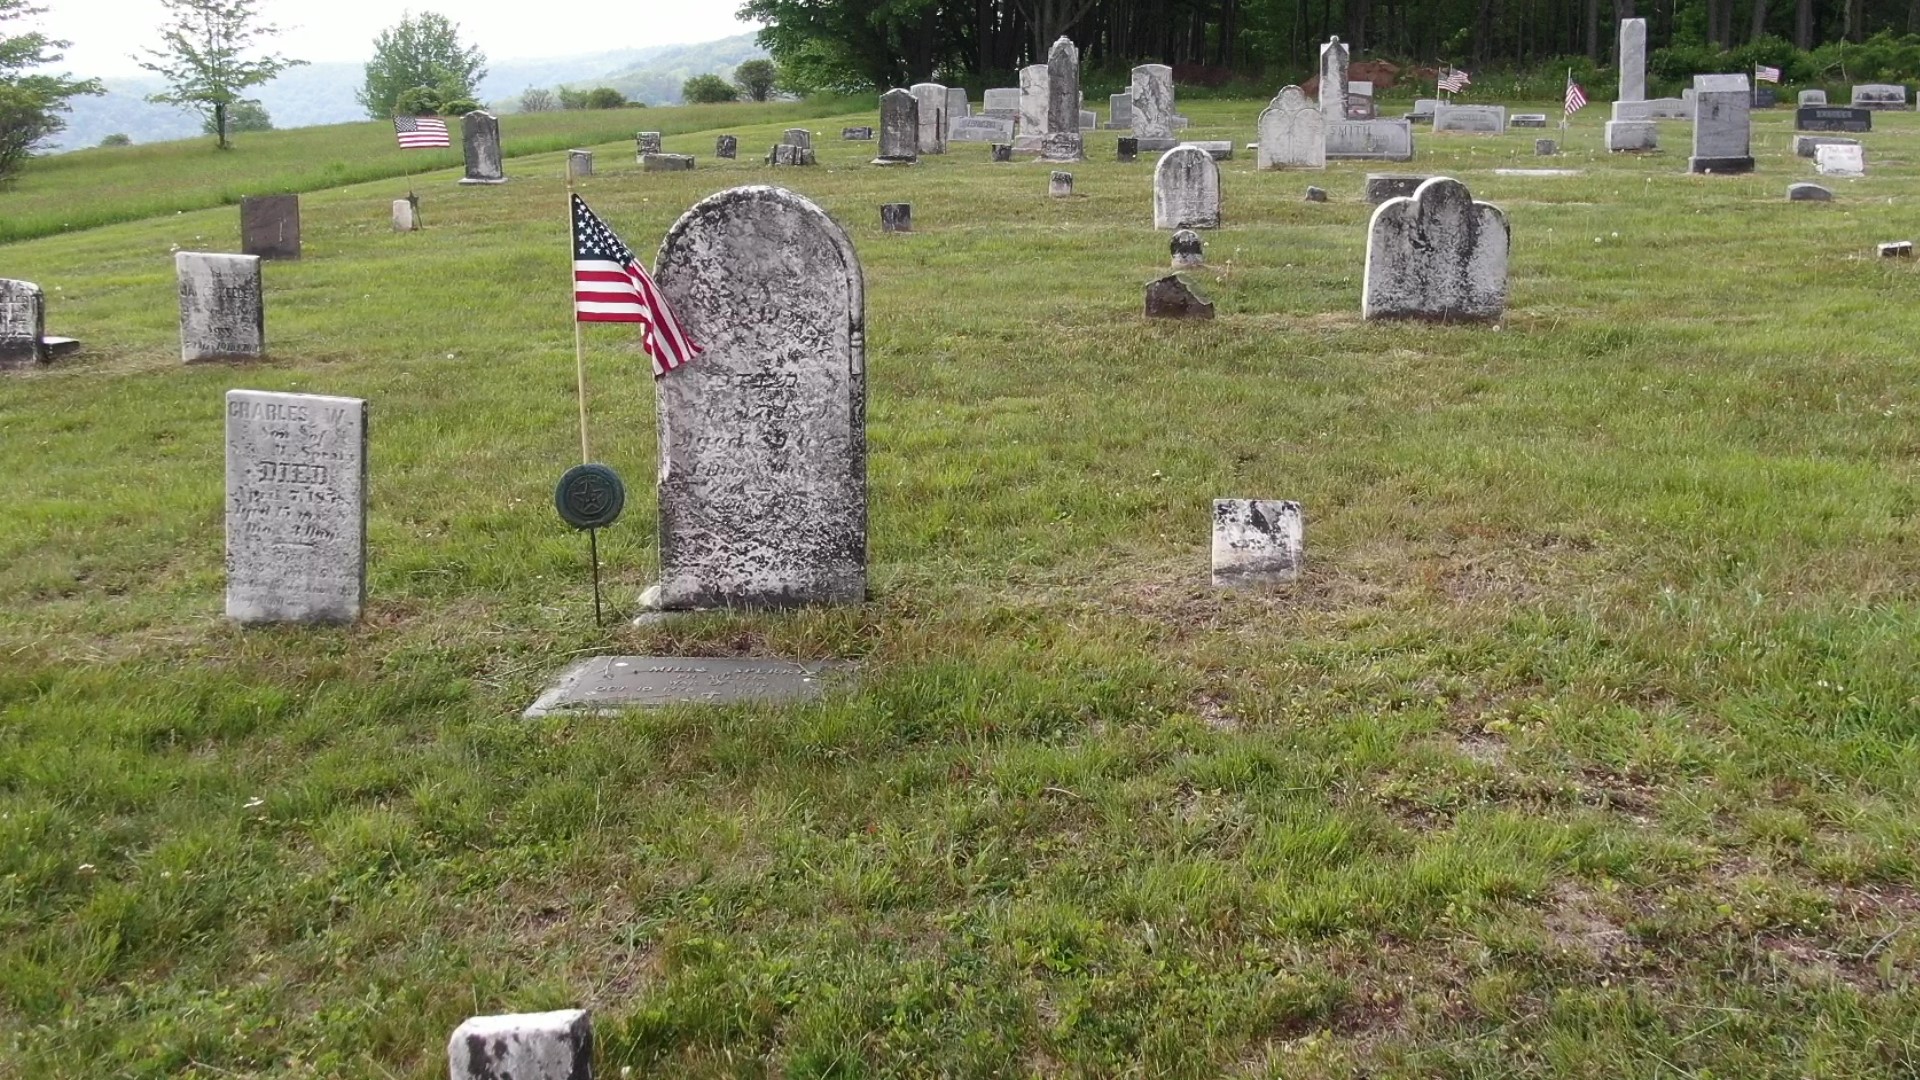 The special place in Sullivan County has graves of veterans dating back to the Revolutionary War and stunning views everywhere you look.